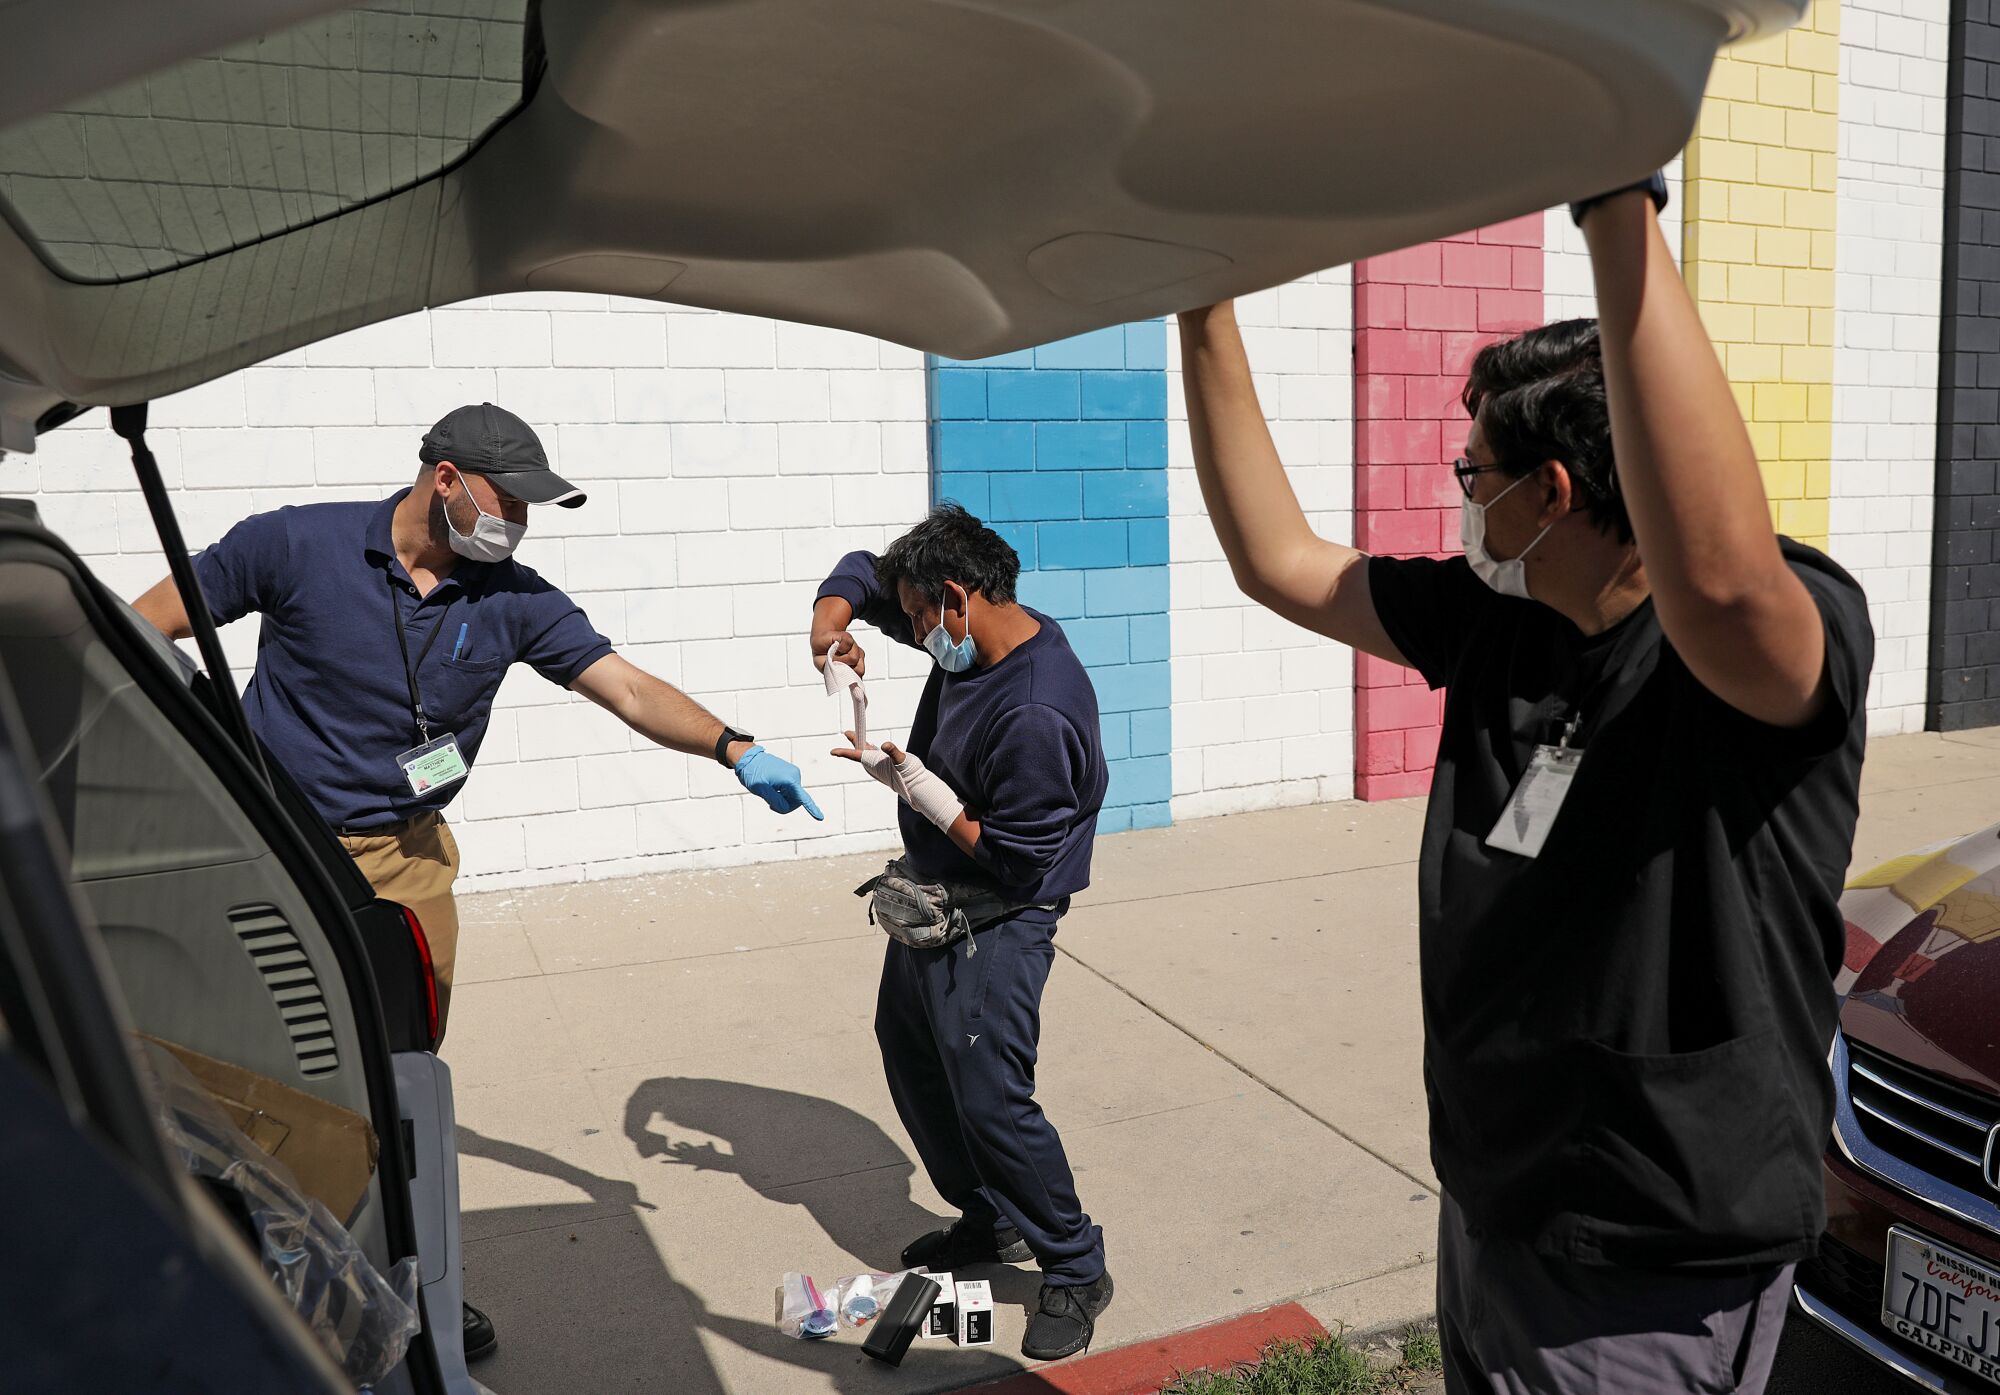 EMT Matthew Malloy and nurse Dionico Erazo tend to a man's injured hand in North Hollywood.